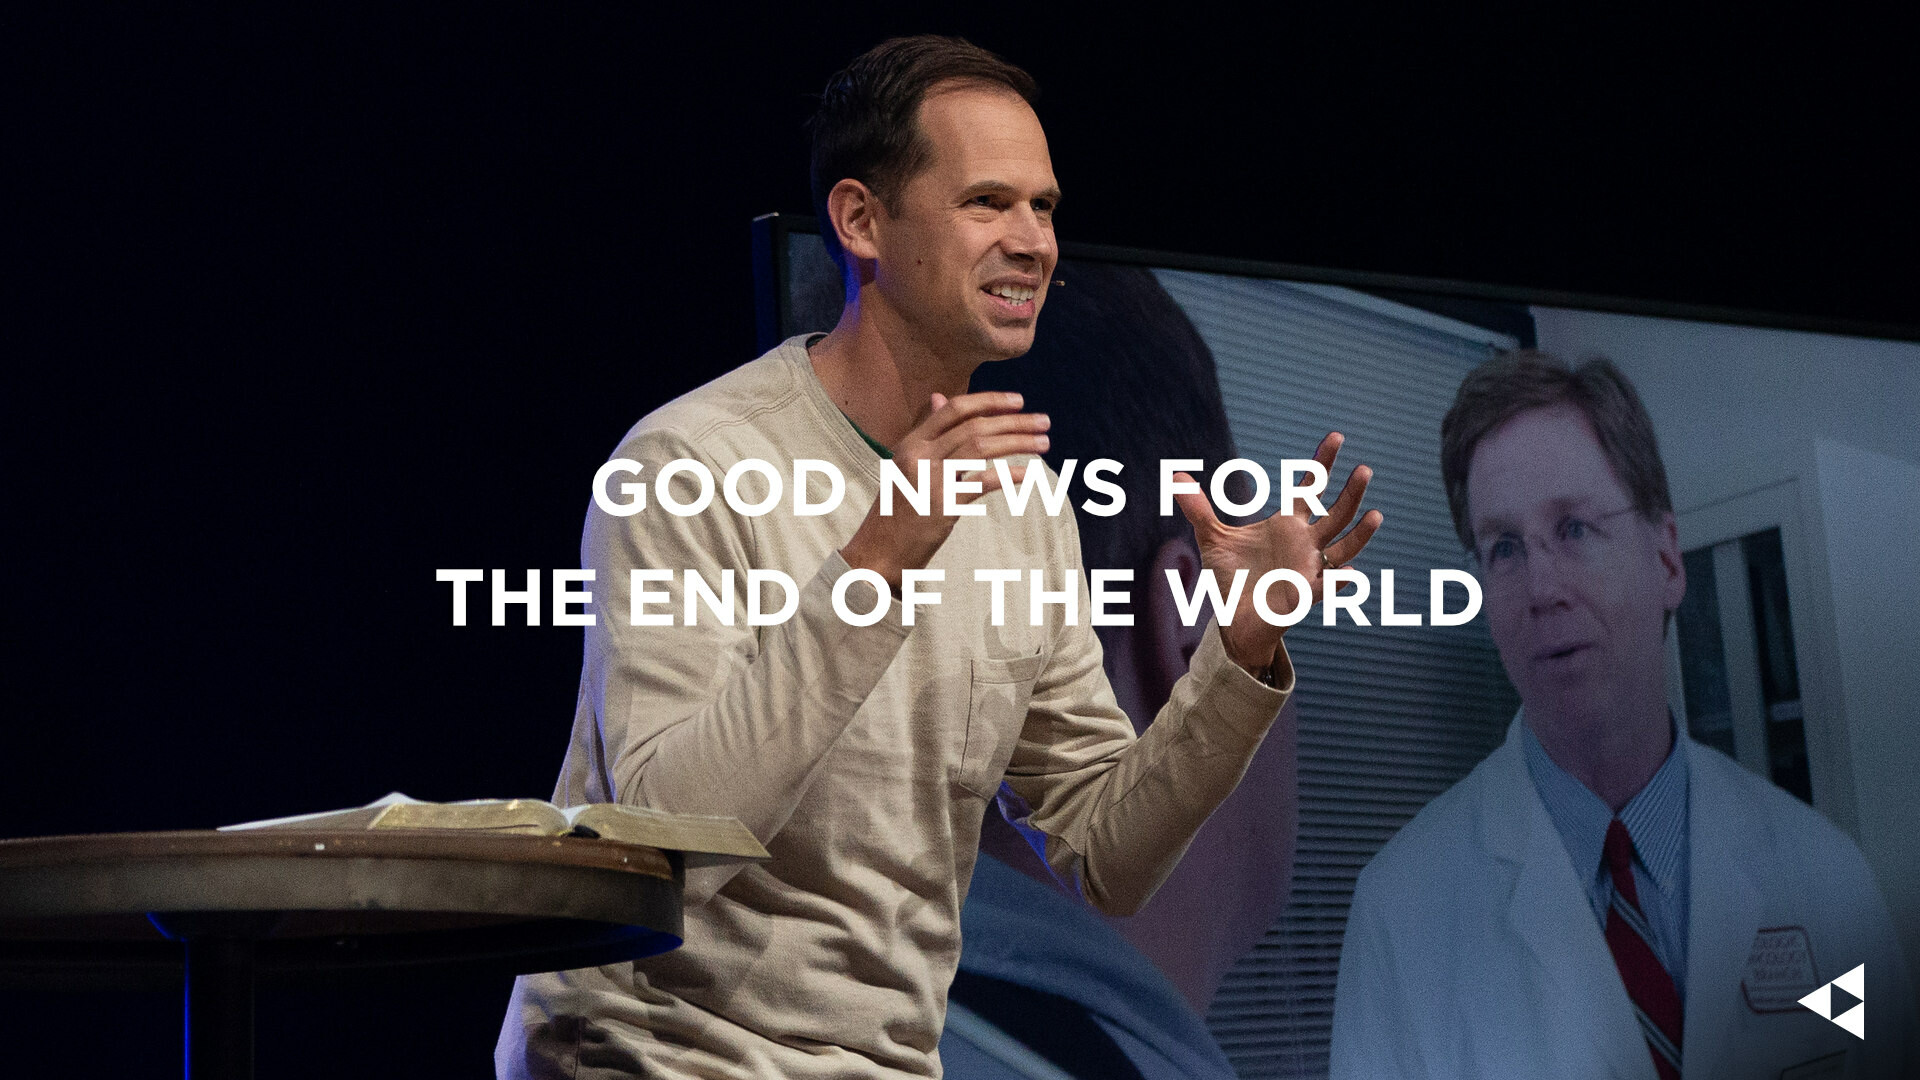 Good News for the End of the World